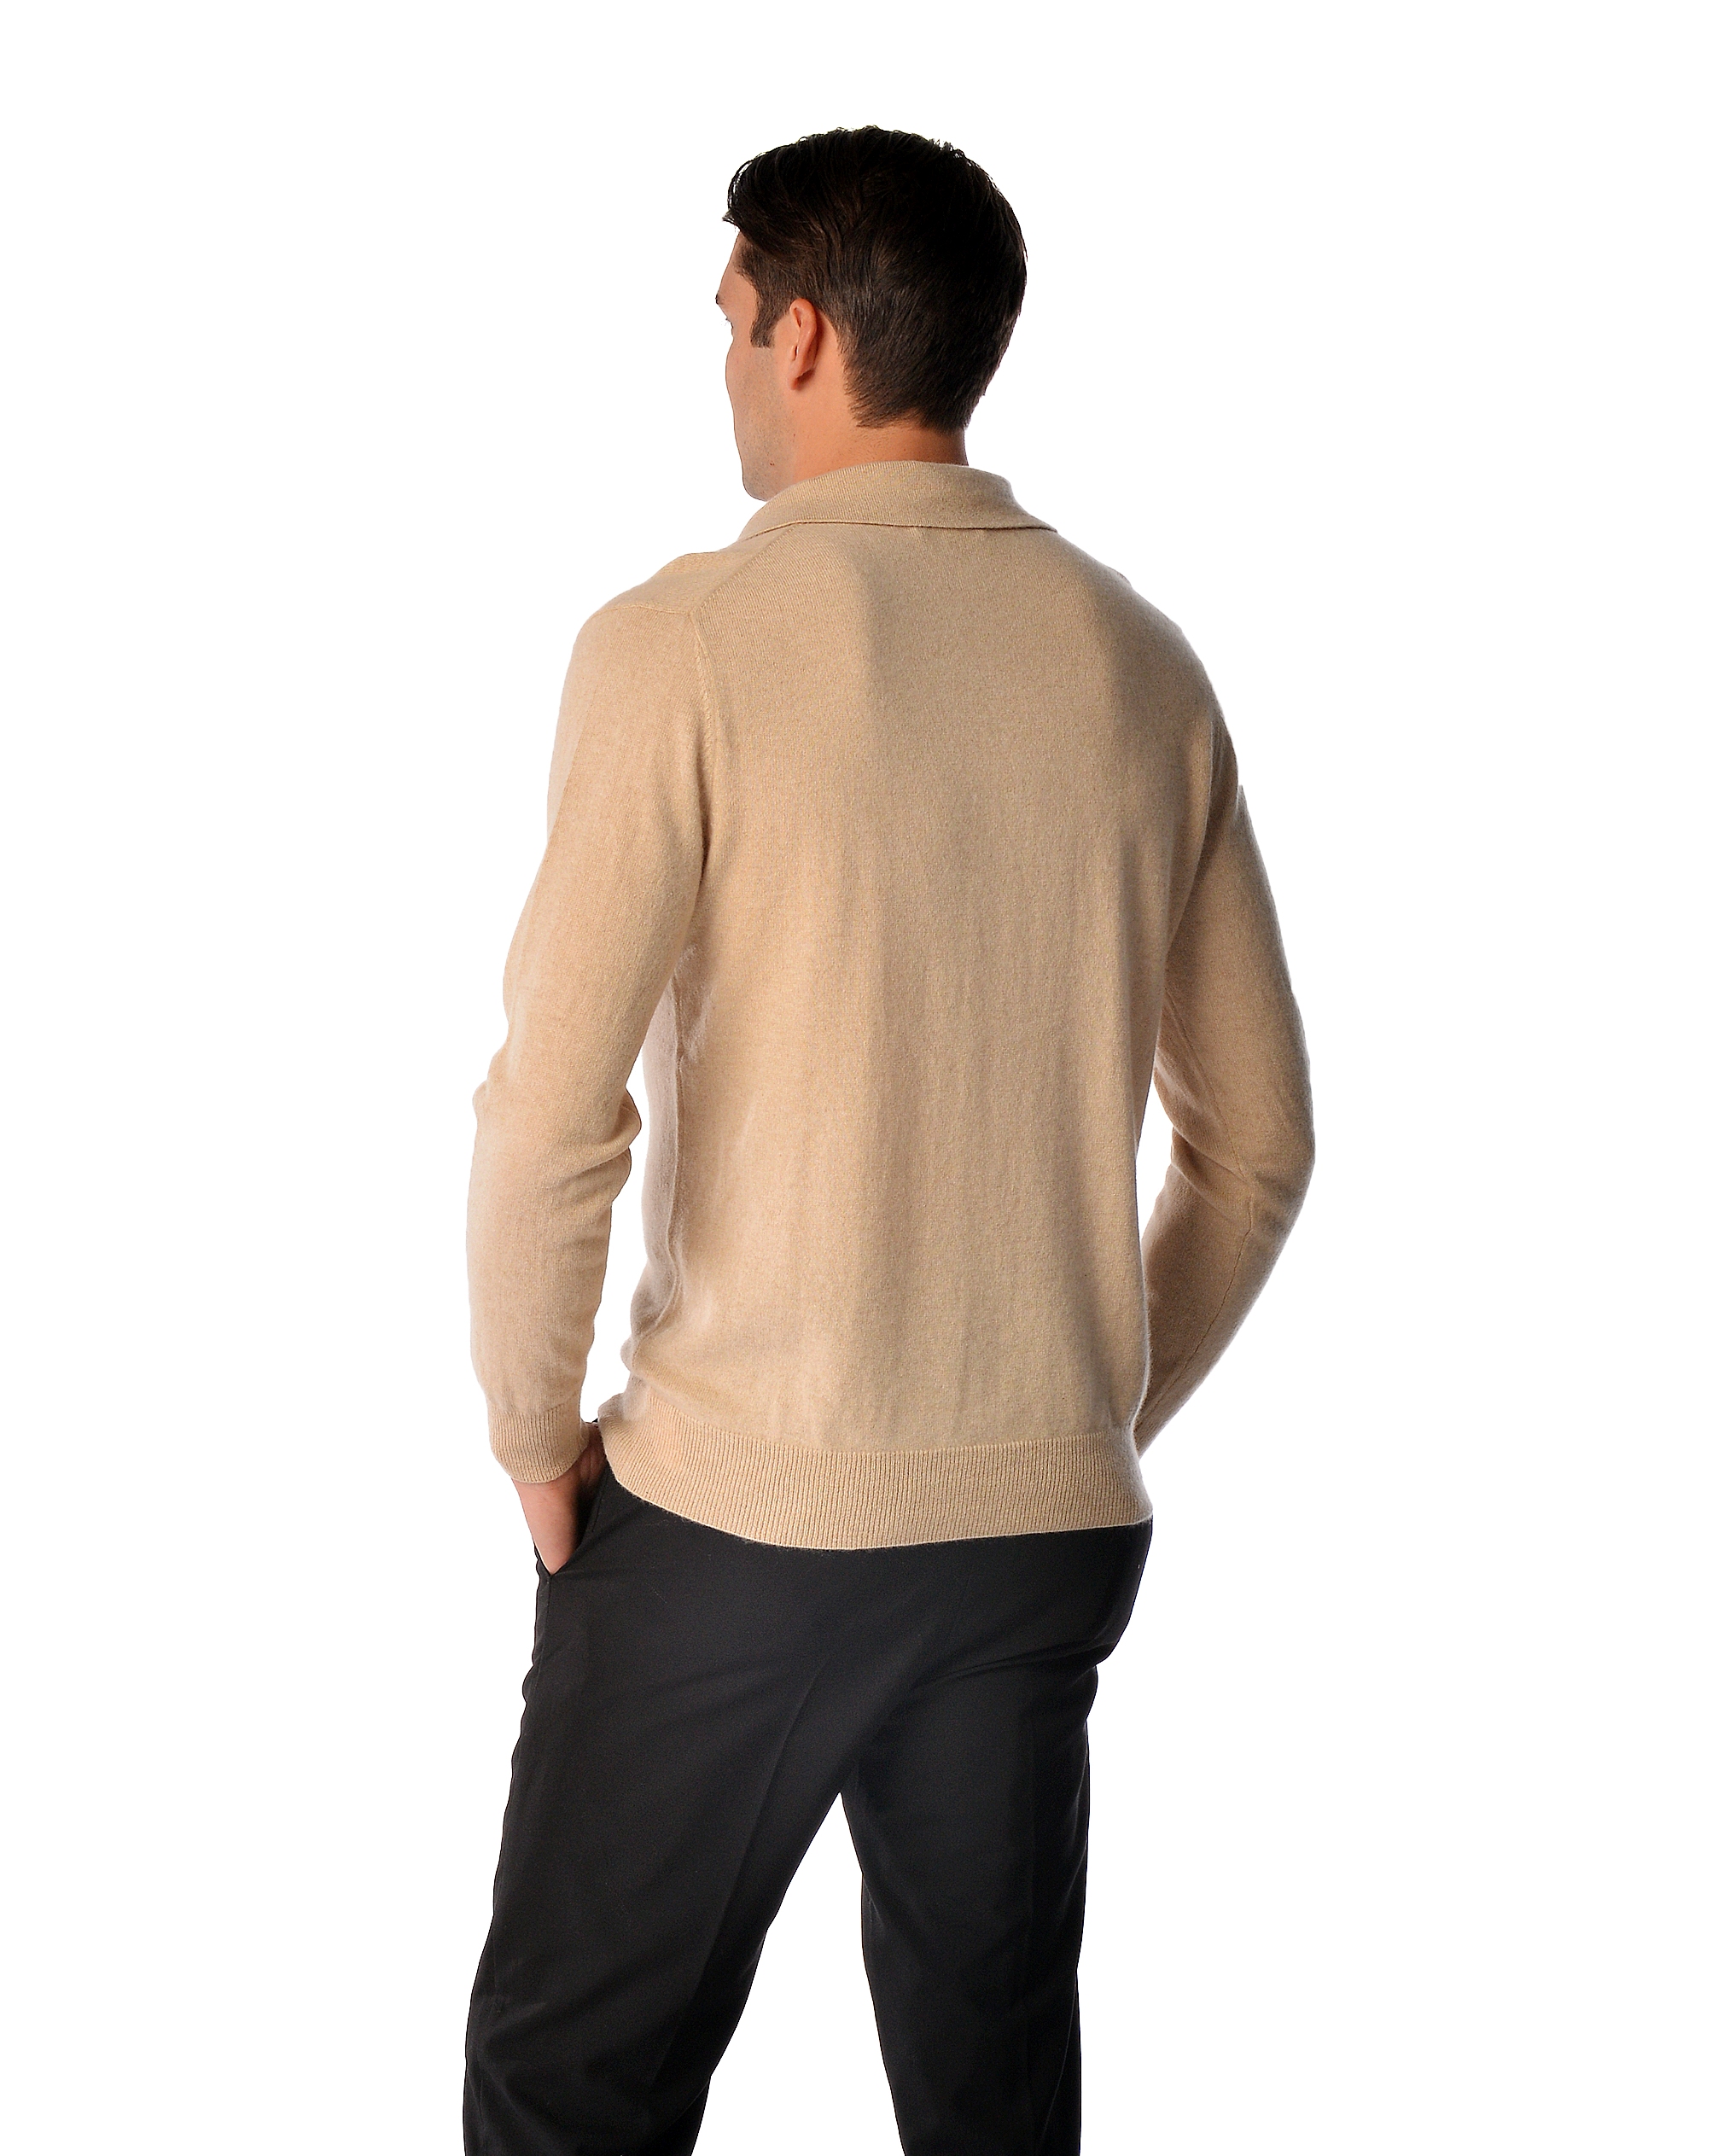 Men\'s Pure Cashmere Polo Sweater (Faded Pewter, Large)